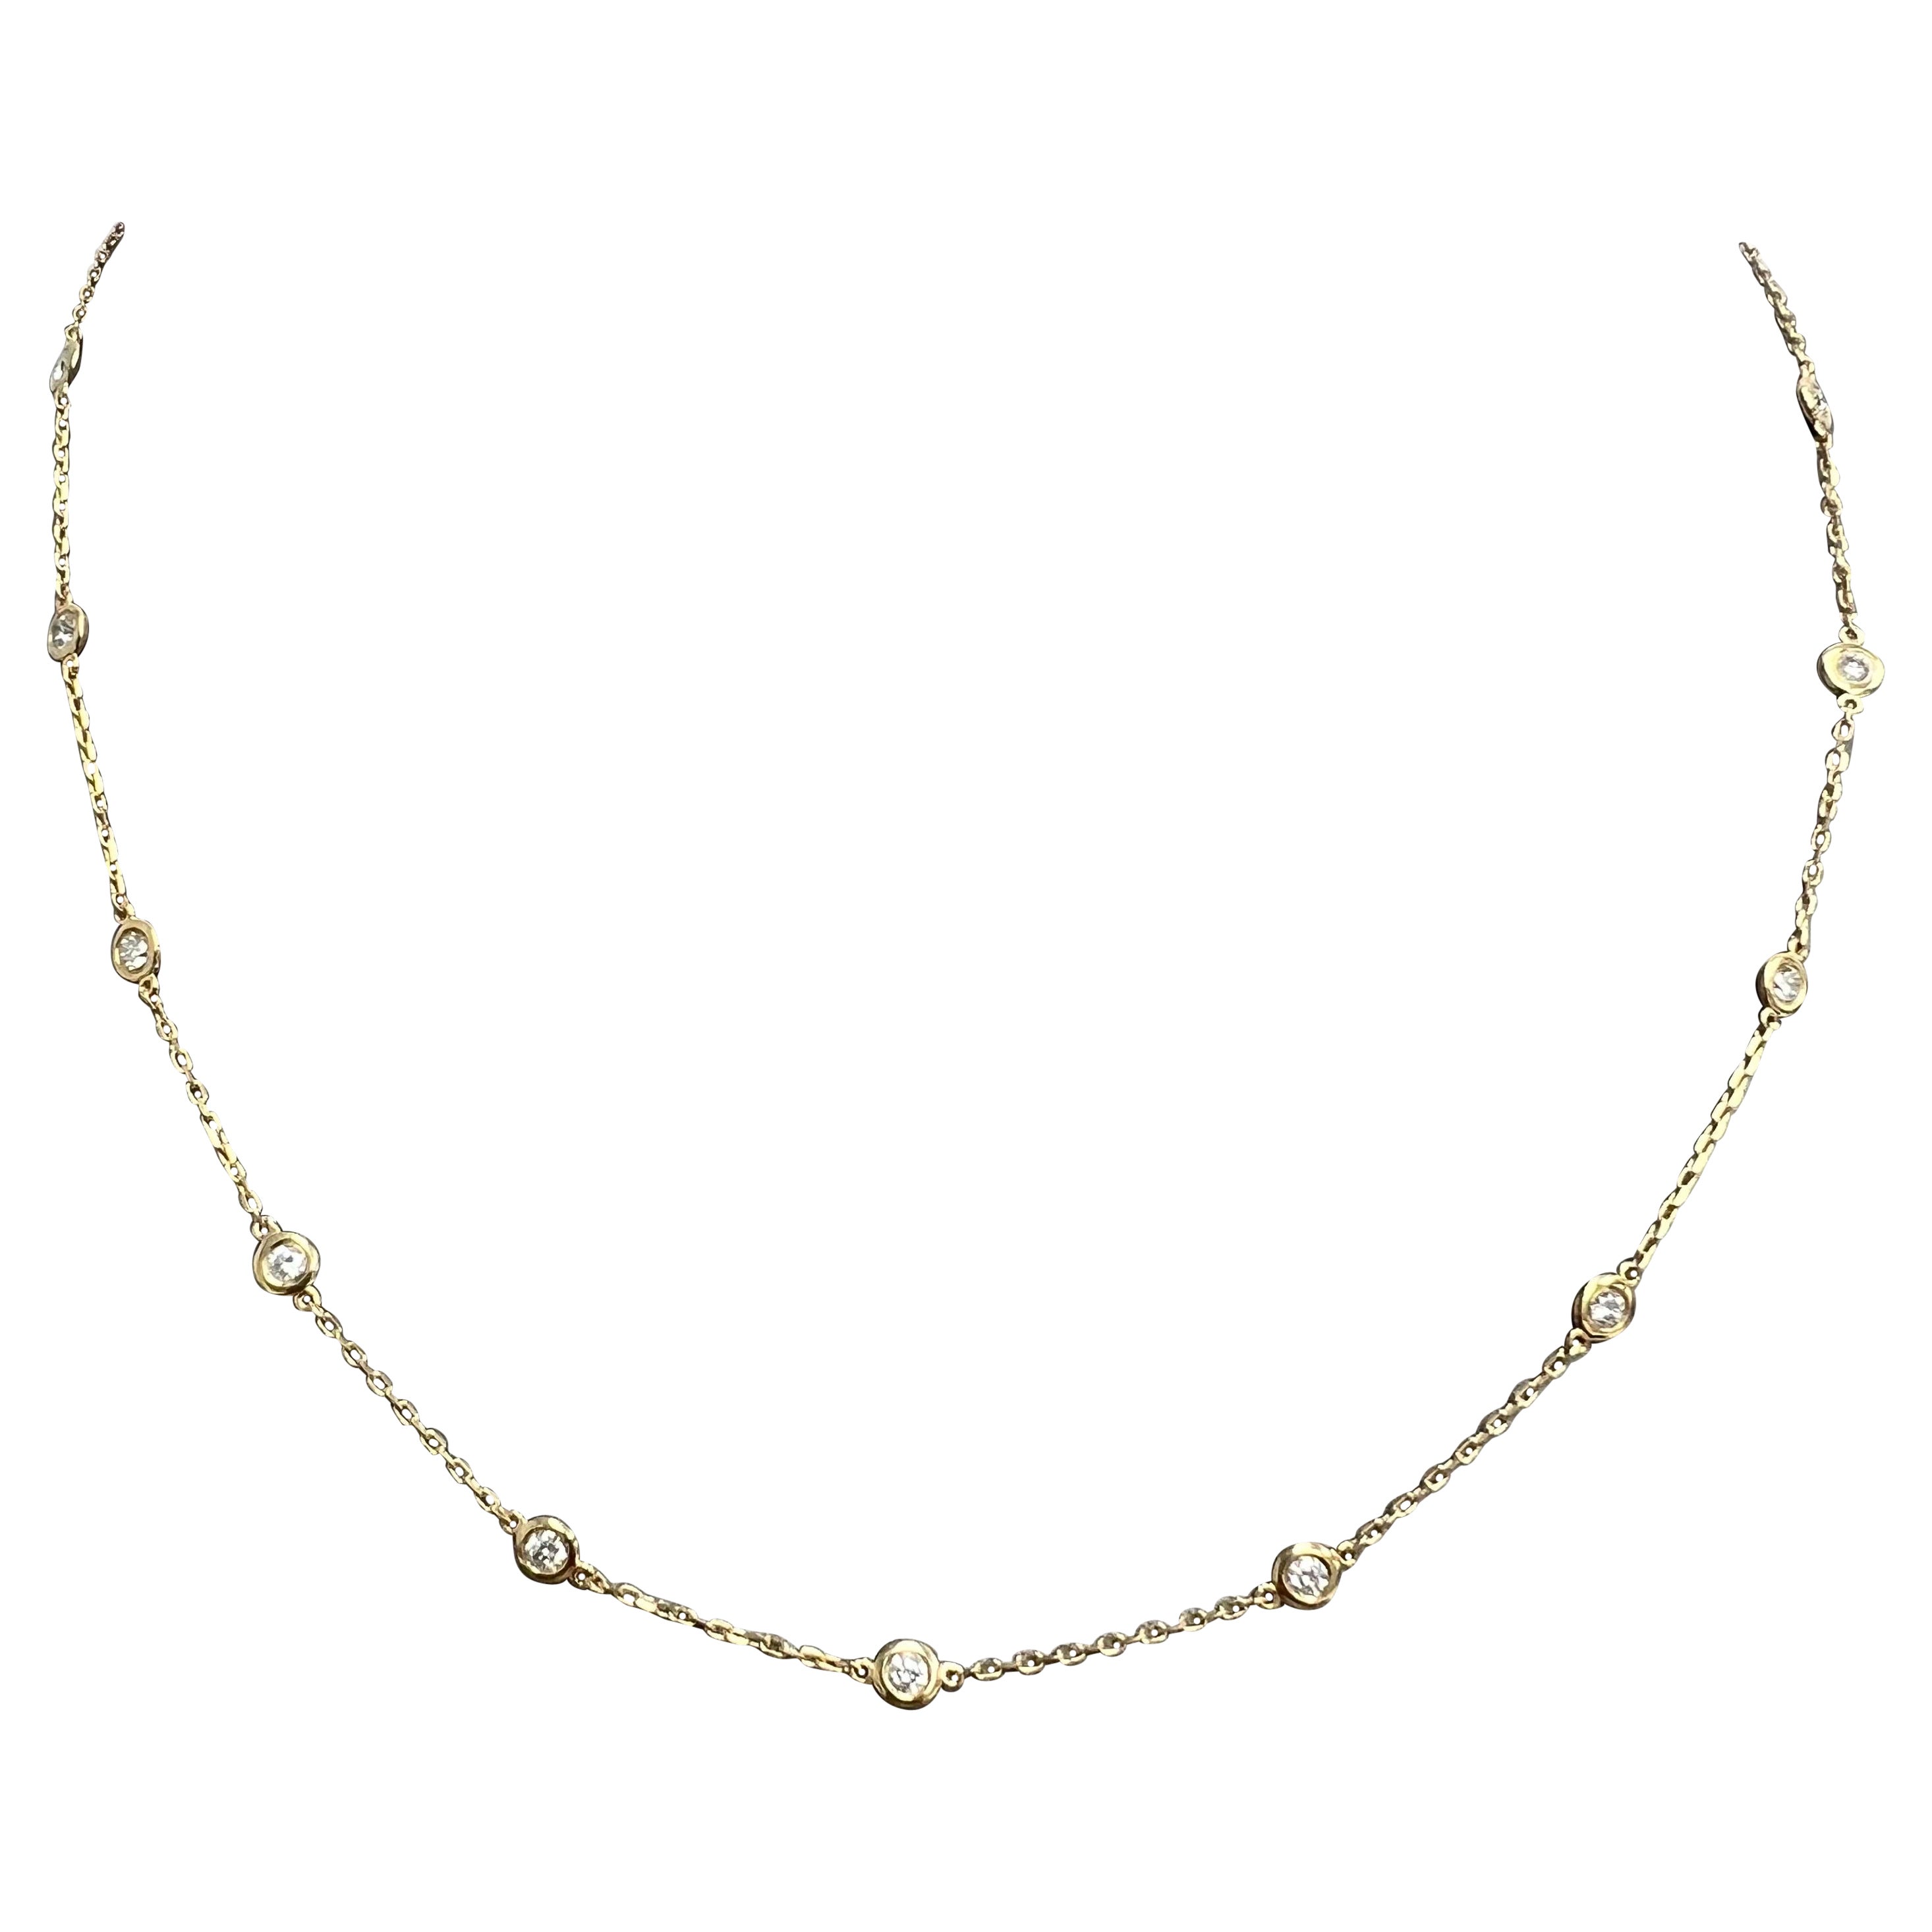 14K Yellow Gold Diamonds by the yard Necklace with 16 Natural Full Cut Diamonds - 1 Carats
The Classiest and most useful Gold and Diamonds Chain in Today’s Market.
Natural Full Cut Diamonds 
14K Yellow Gold
Number of Diamonds: 16
Total Diamonds